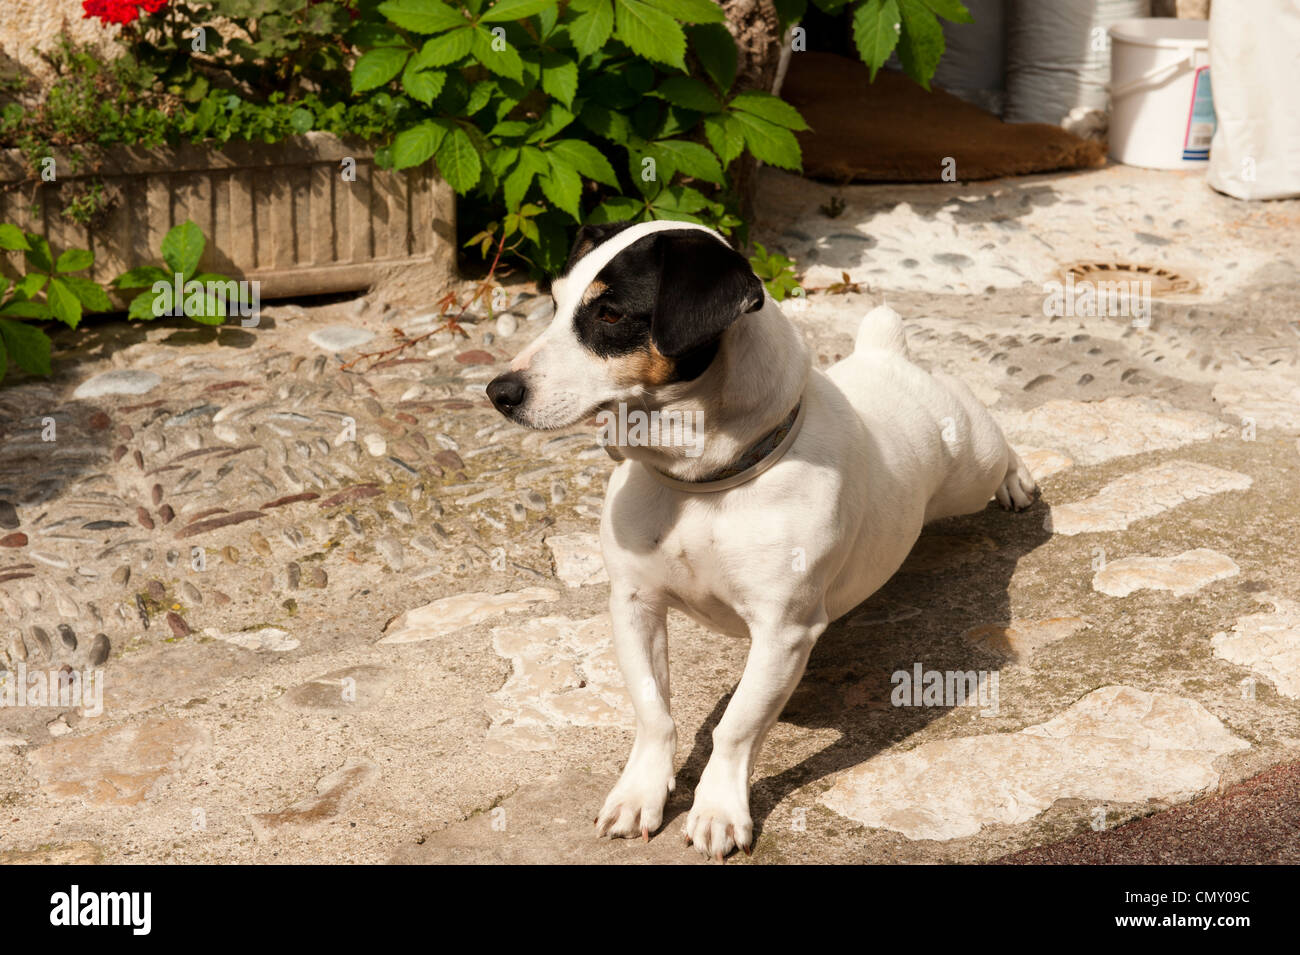 A white dog with black ears and tan spots near its eyes. The dog is resting on its hind legs. Stock Photo